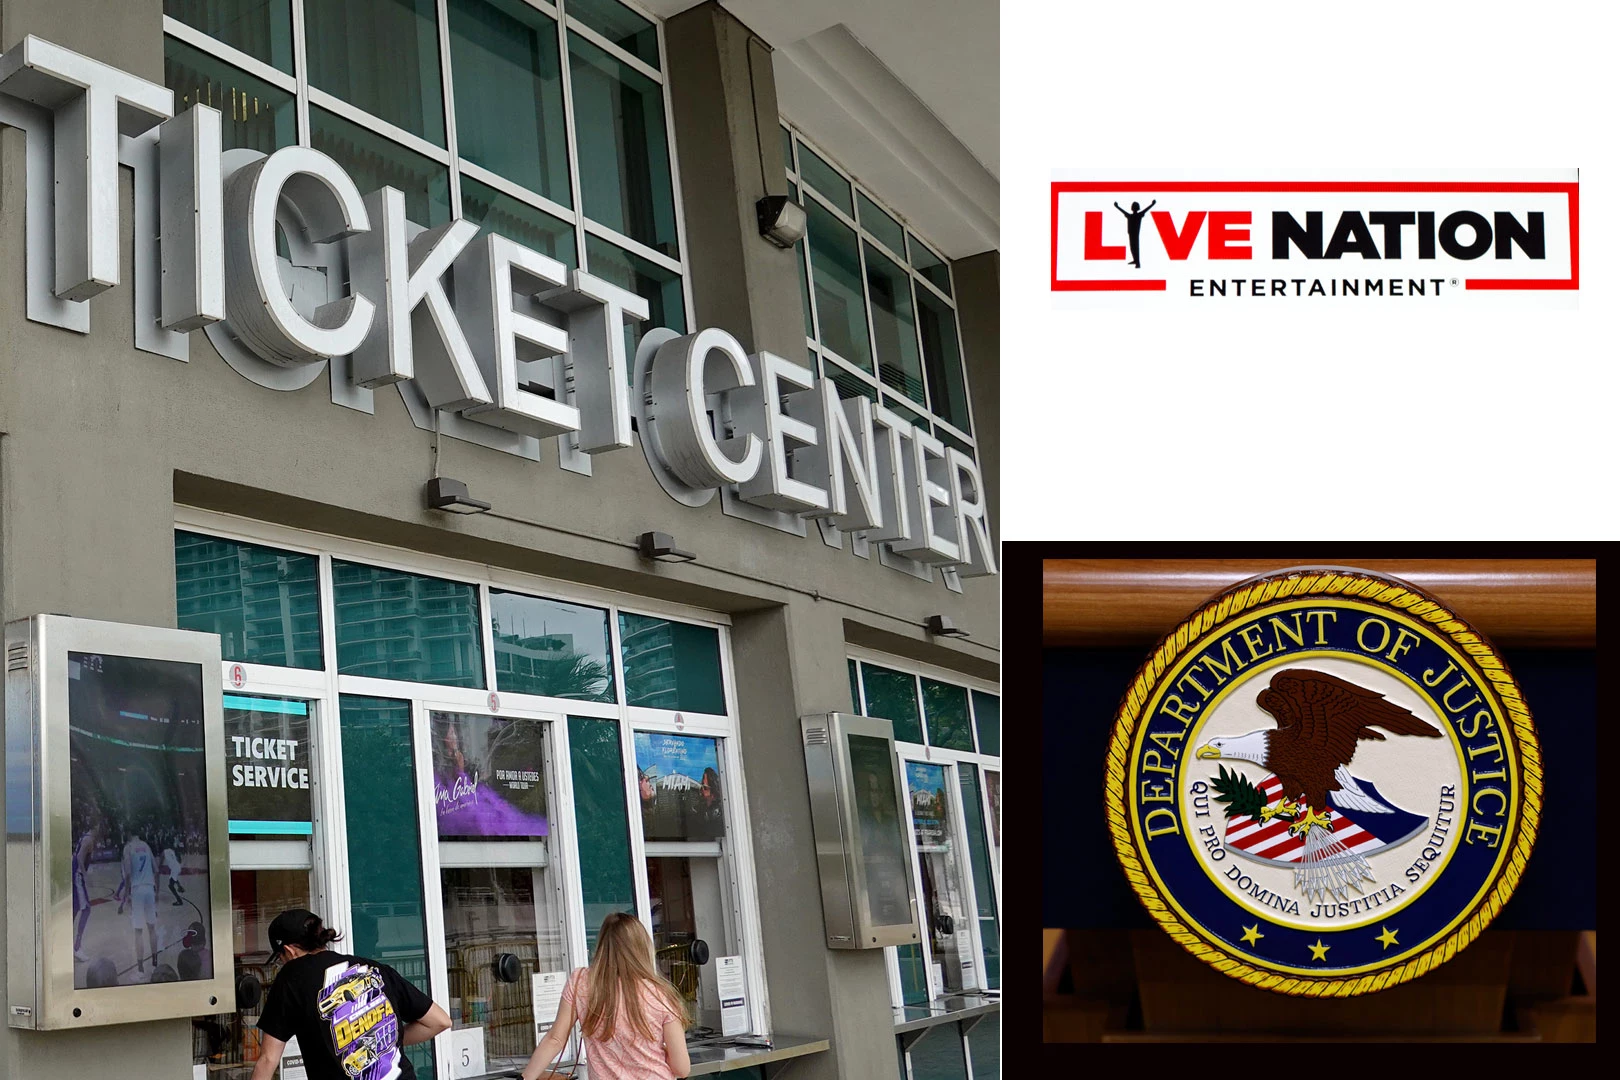 attachment-ticket-center-live-nation-department-of-justice